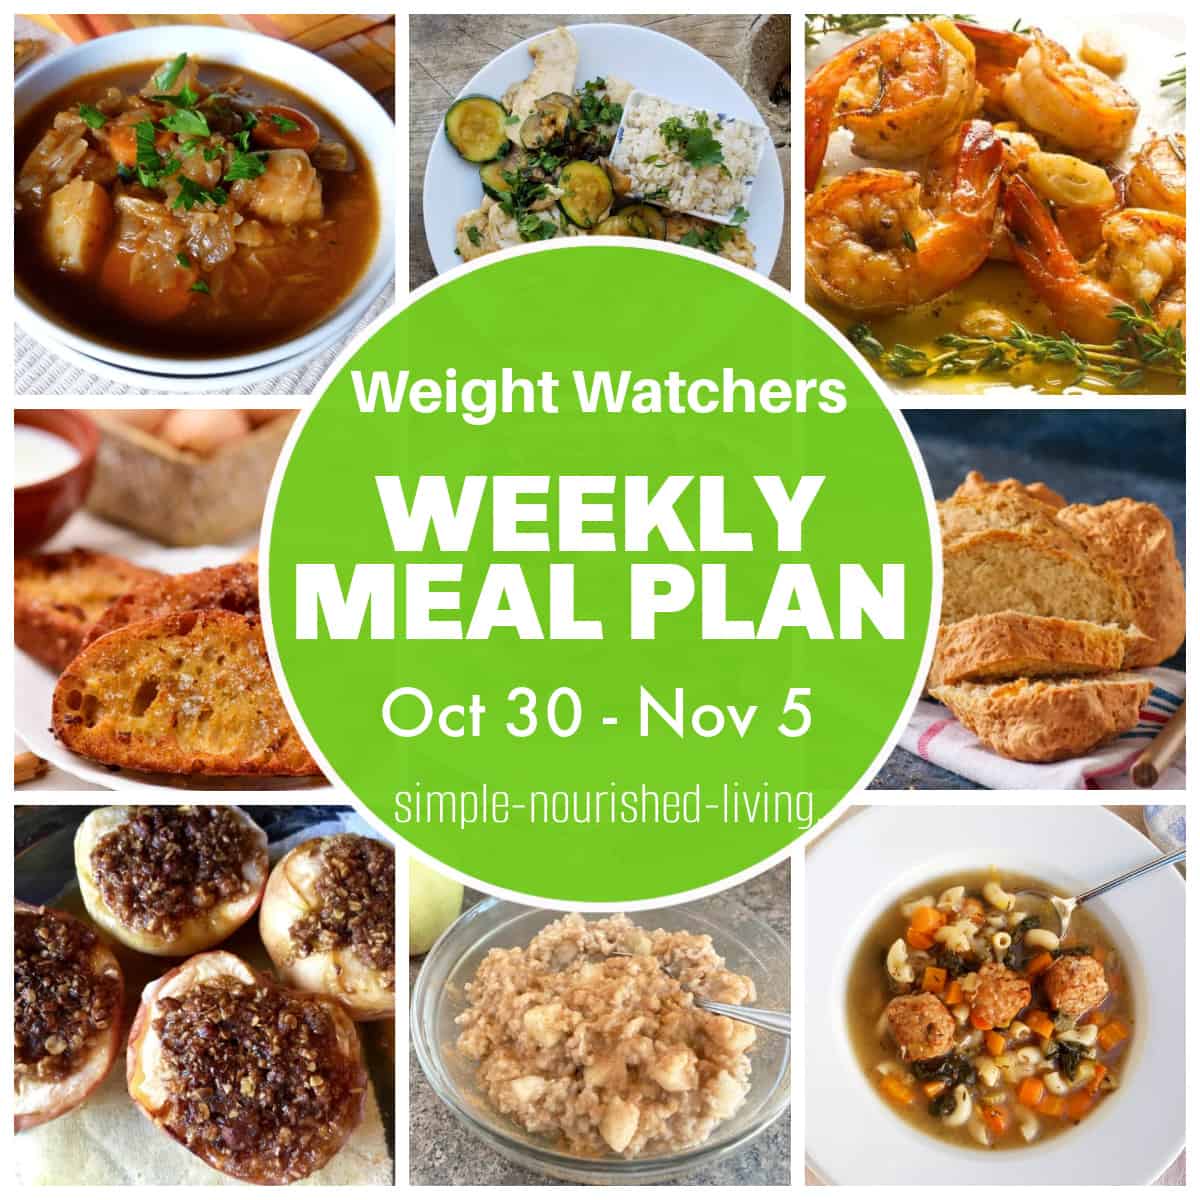 WW Weekly Meal Plan Oct 30